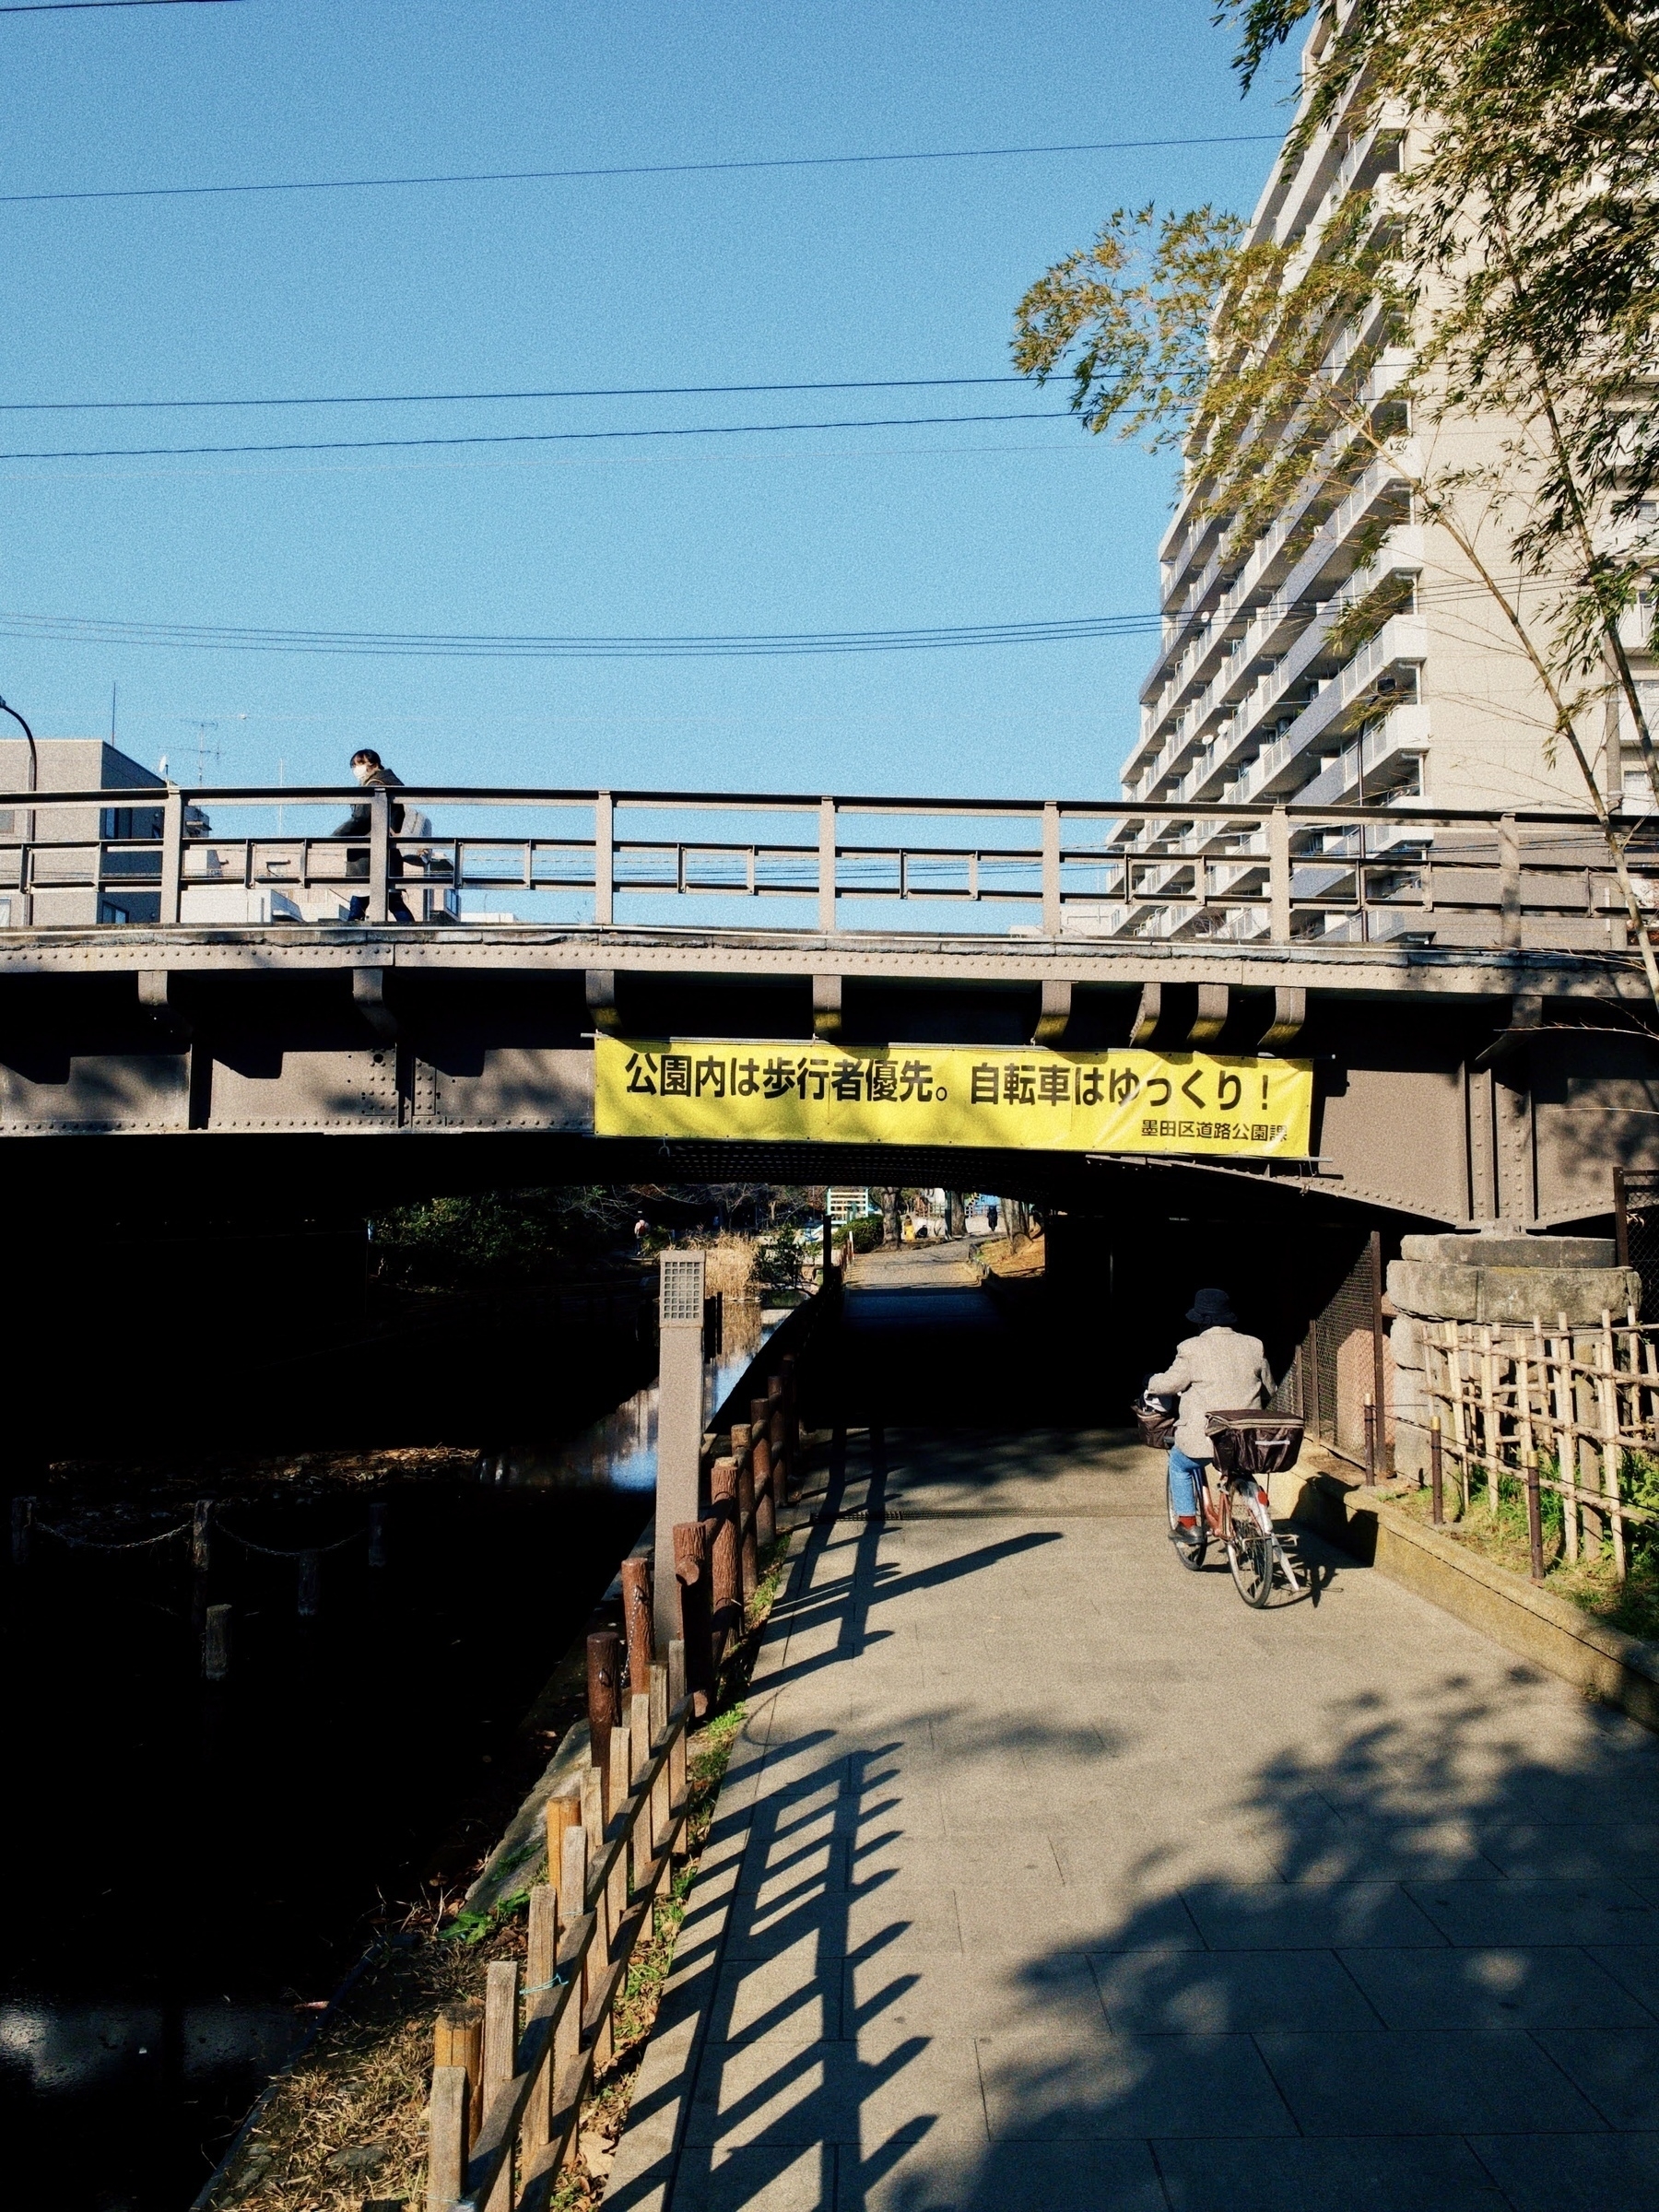 A bike rider in a grey jacket rides under an underpass while a walker crosses the bridge above. The yellow sign on the bridge admonishes riders that pedestrians have right of way, and to ride slowly. 